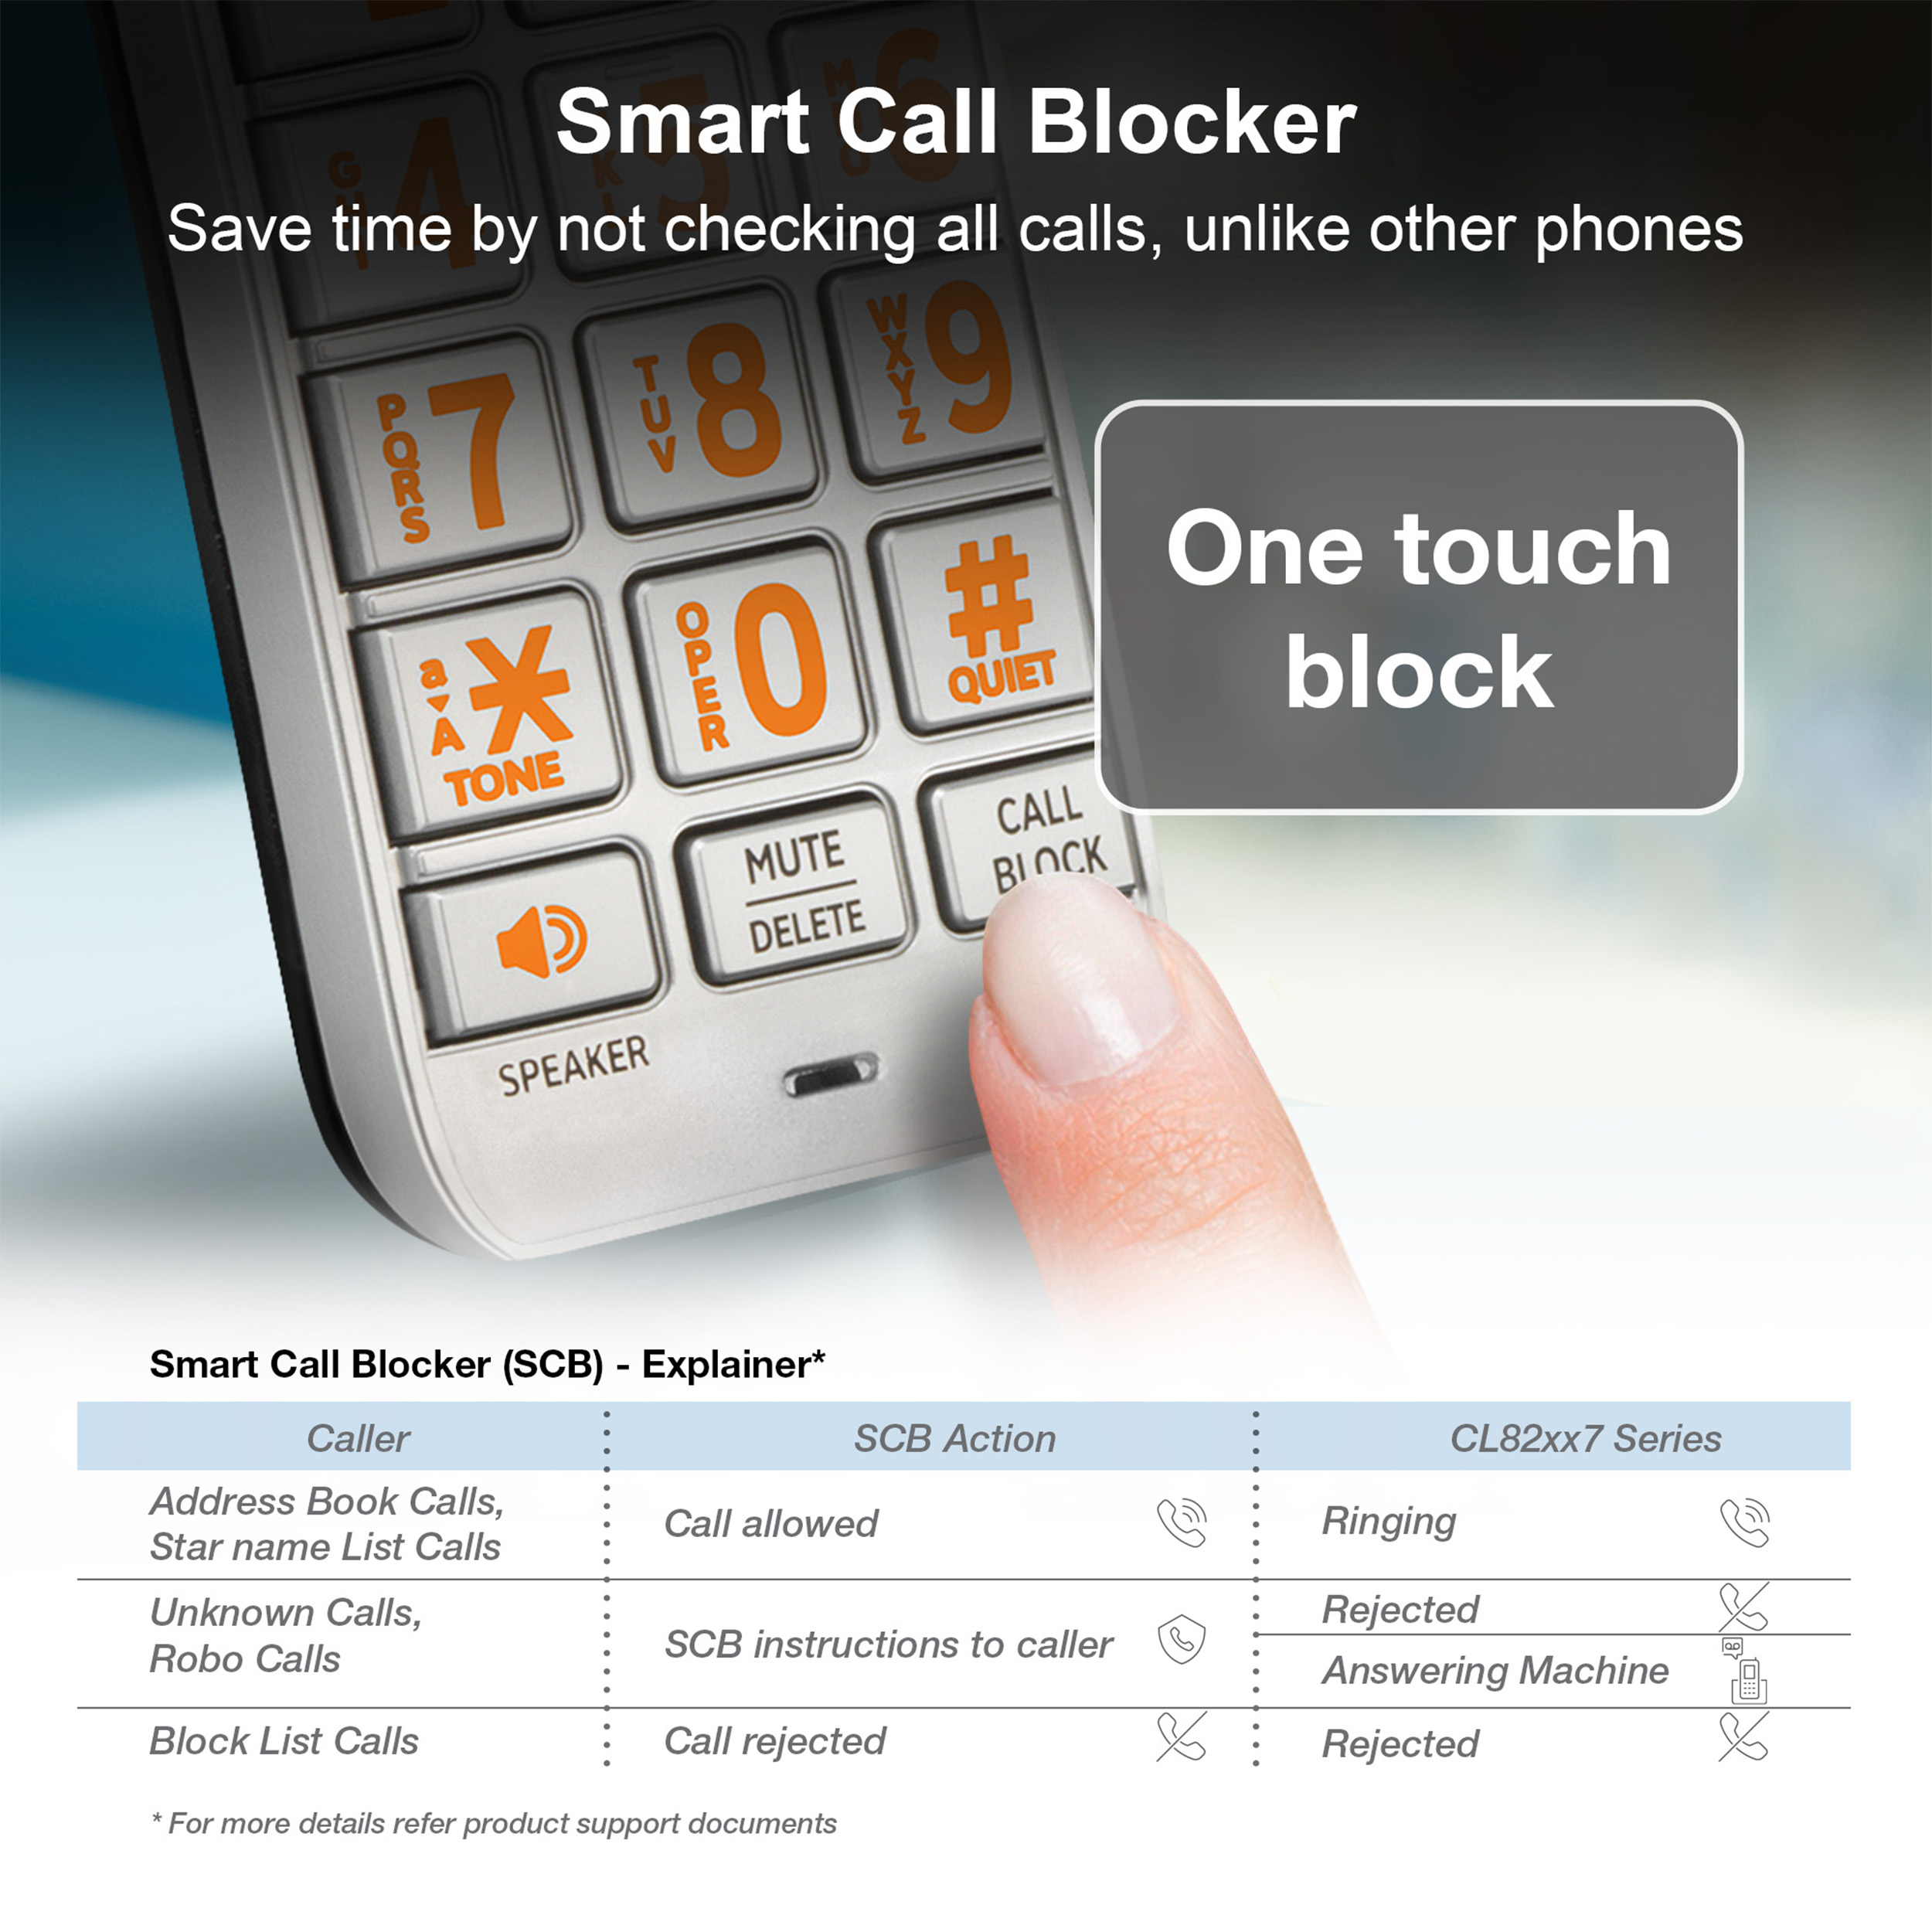 6 handset phone system with smart call blocker - view 4